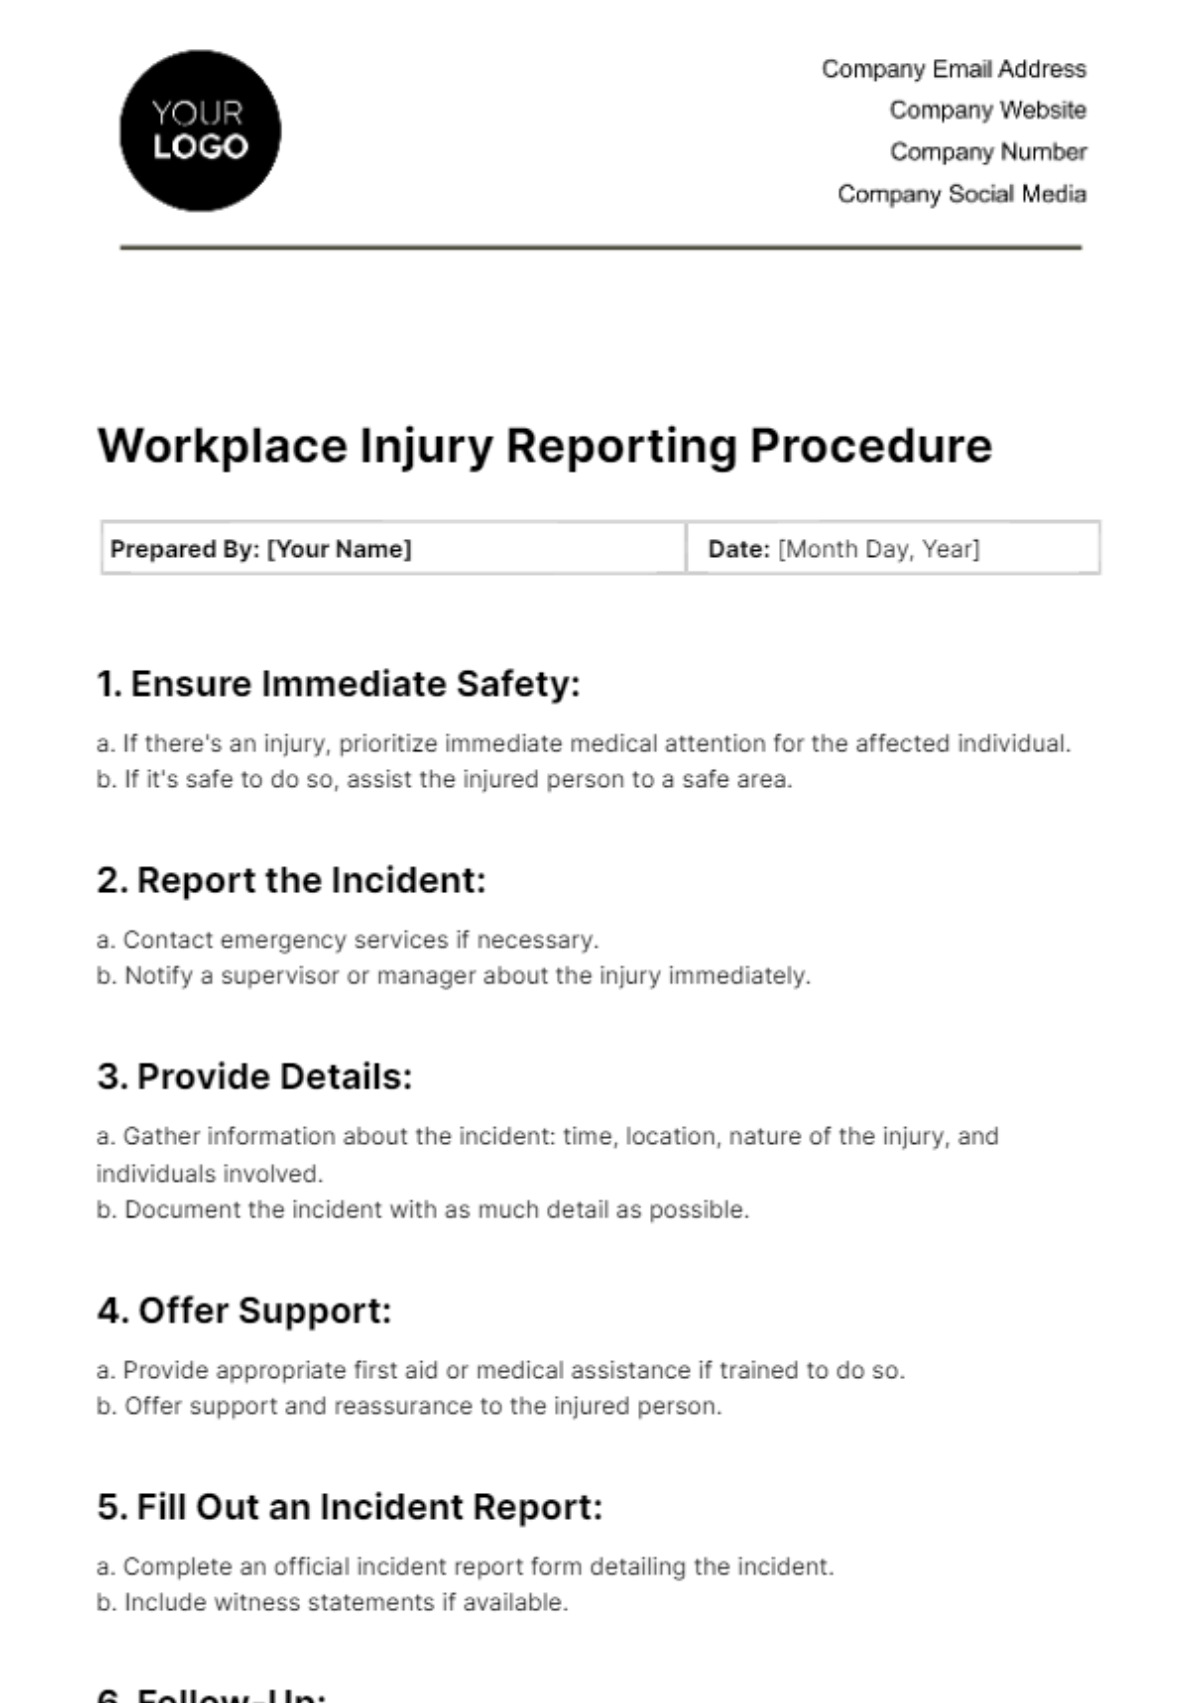 Free Workplace Injury Reporting Procedure Template